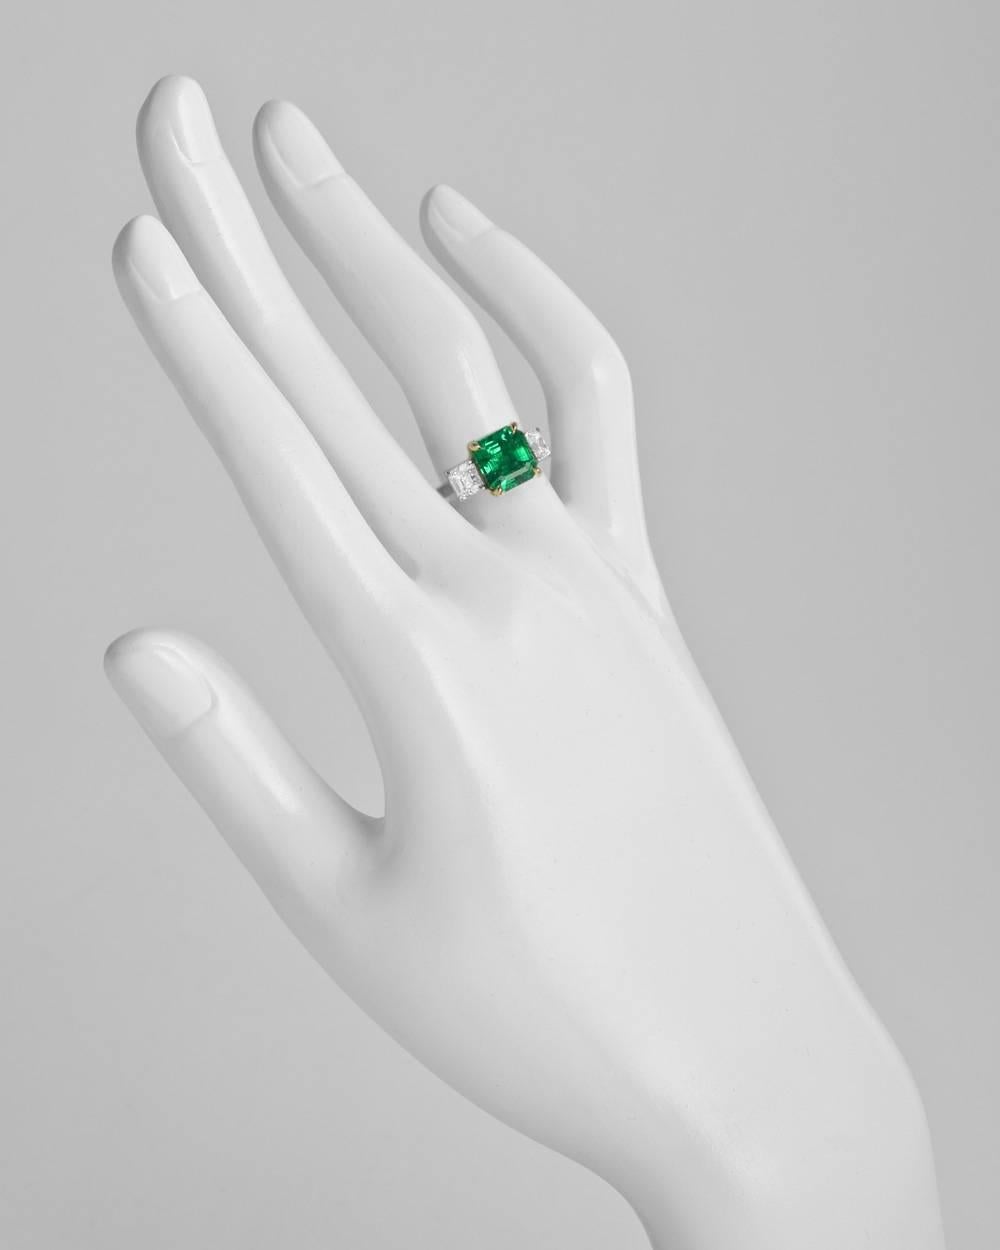 Colombian emerald and diamond ring, centering a fine octagonal-shaped step-cut emerald weighing 2.42 carats, flanked by a pair of colorless asscher-cut diamond shoulders weighing 1.05 total carats (D-E color/VS1-VS2 clarity), mounted in platinum